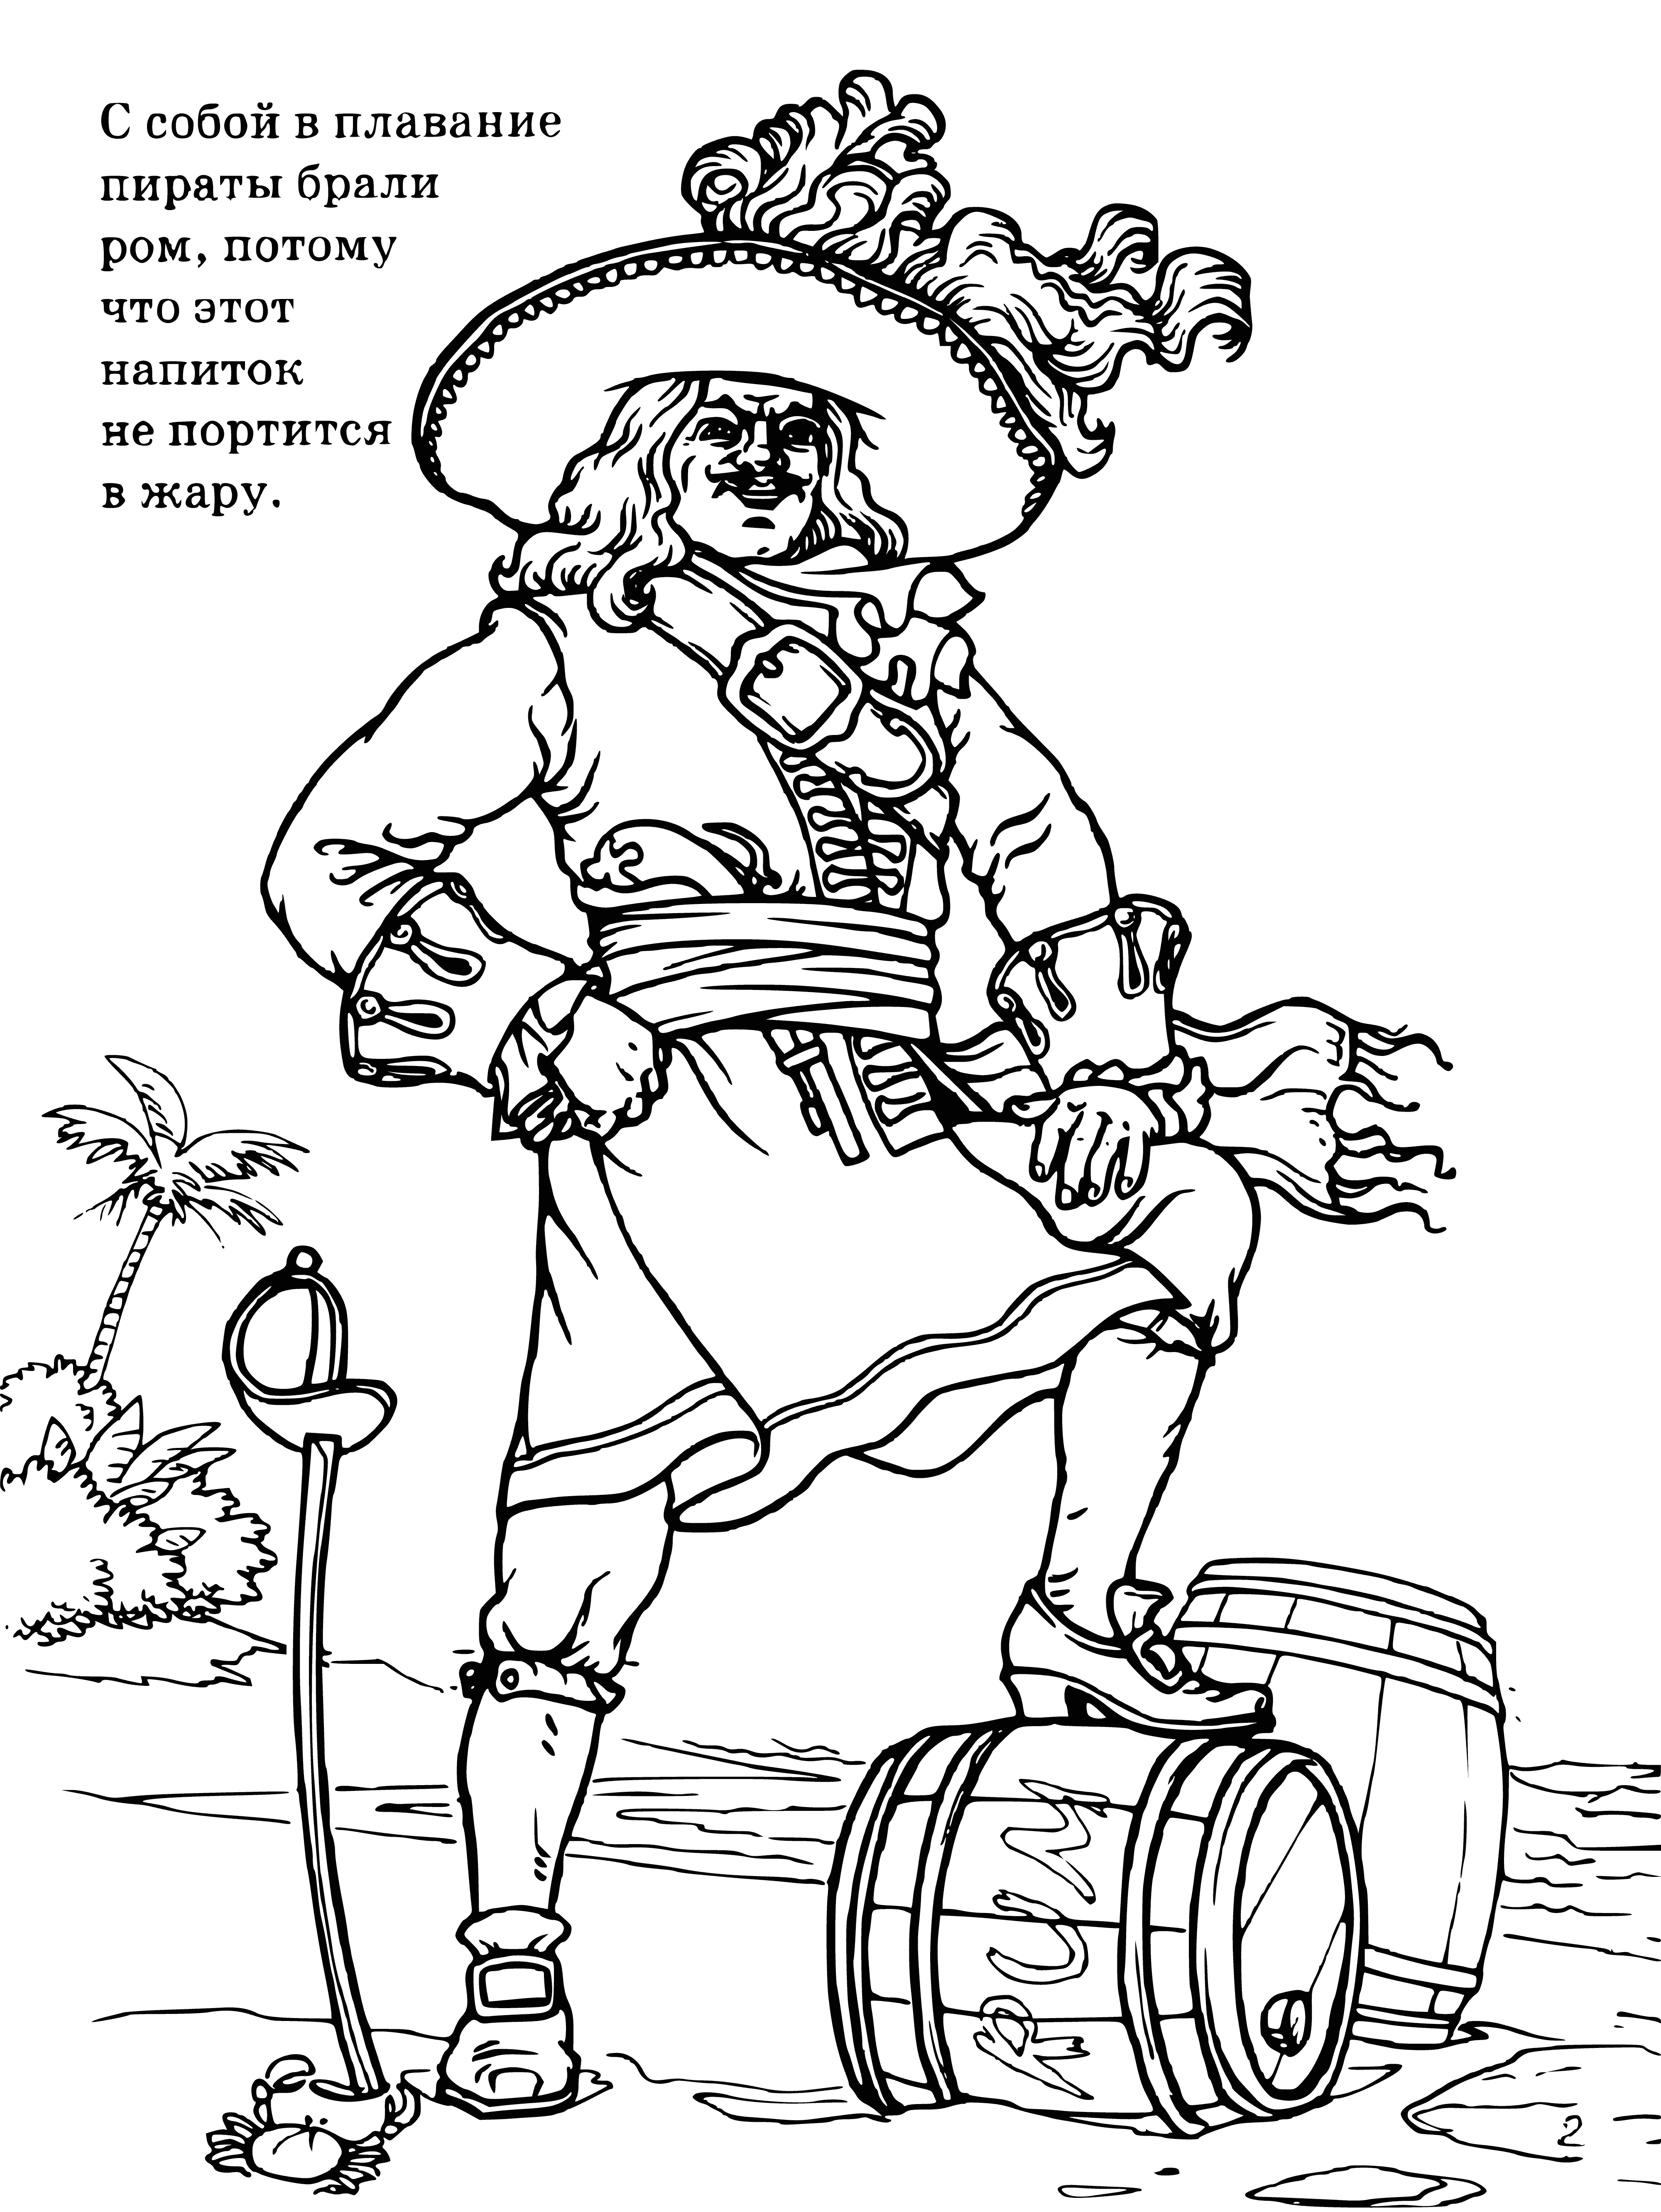 coloring page: A pirate baron stands atop a ship's deck overlooking the ocean, a long-bearded, scarred figure in a hat and coat, supervising the busy crew.